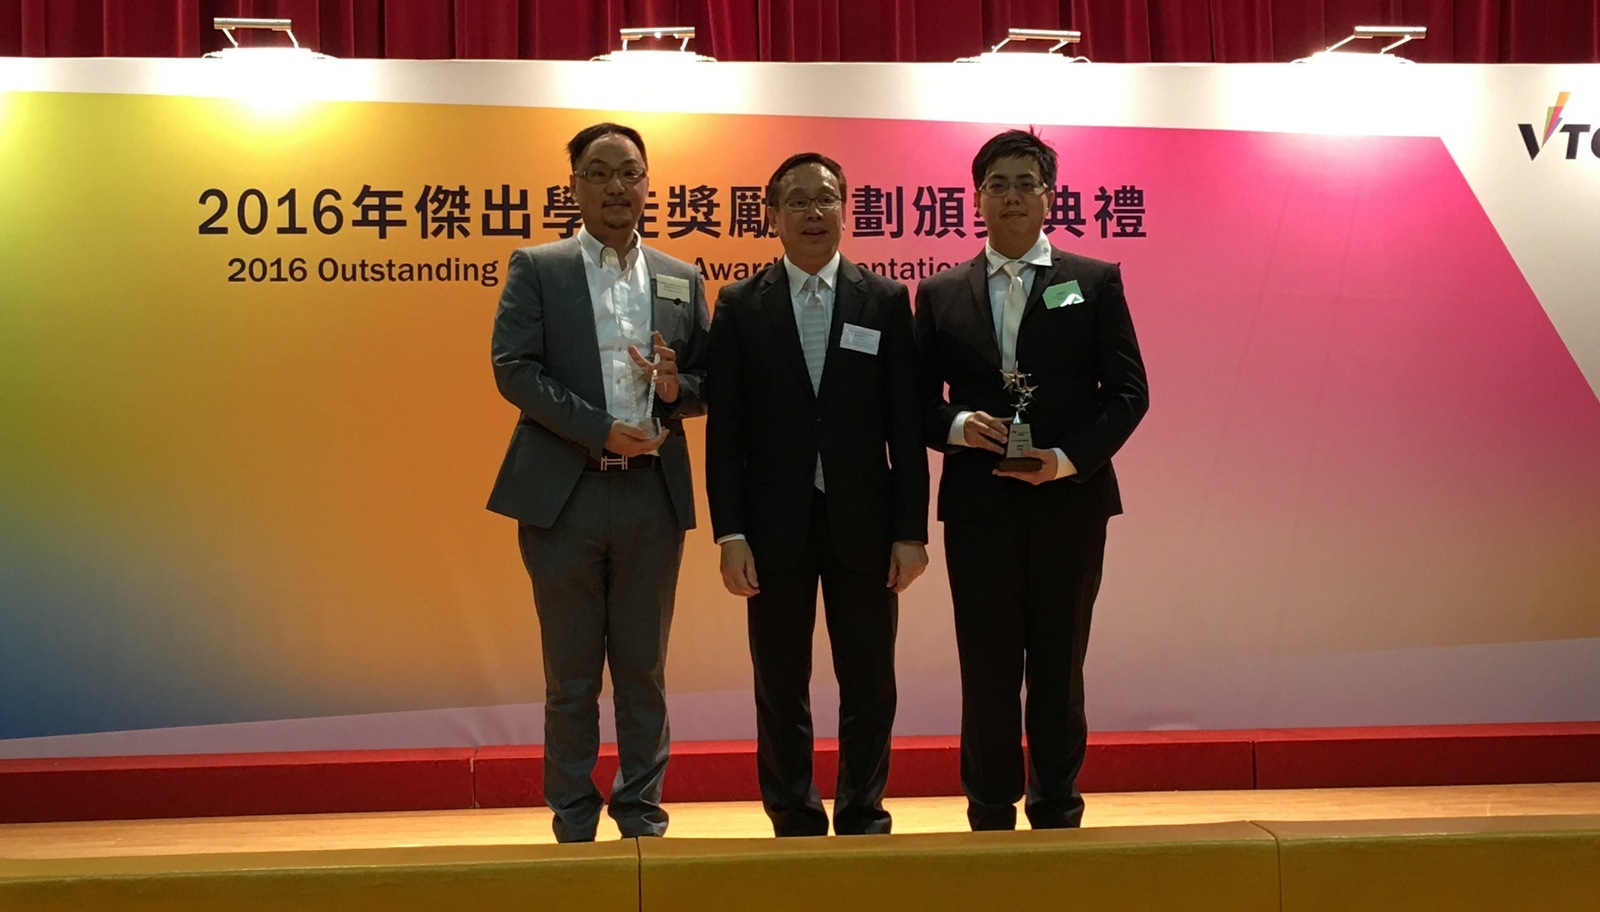 Jason Chu (Right), Assistant Quantity Surveyor of Hip Hing, received the 2016 Outstanding Apprentices Merit Award